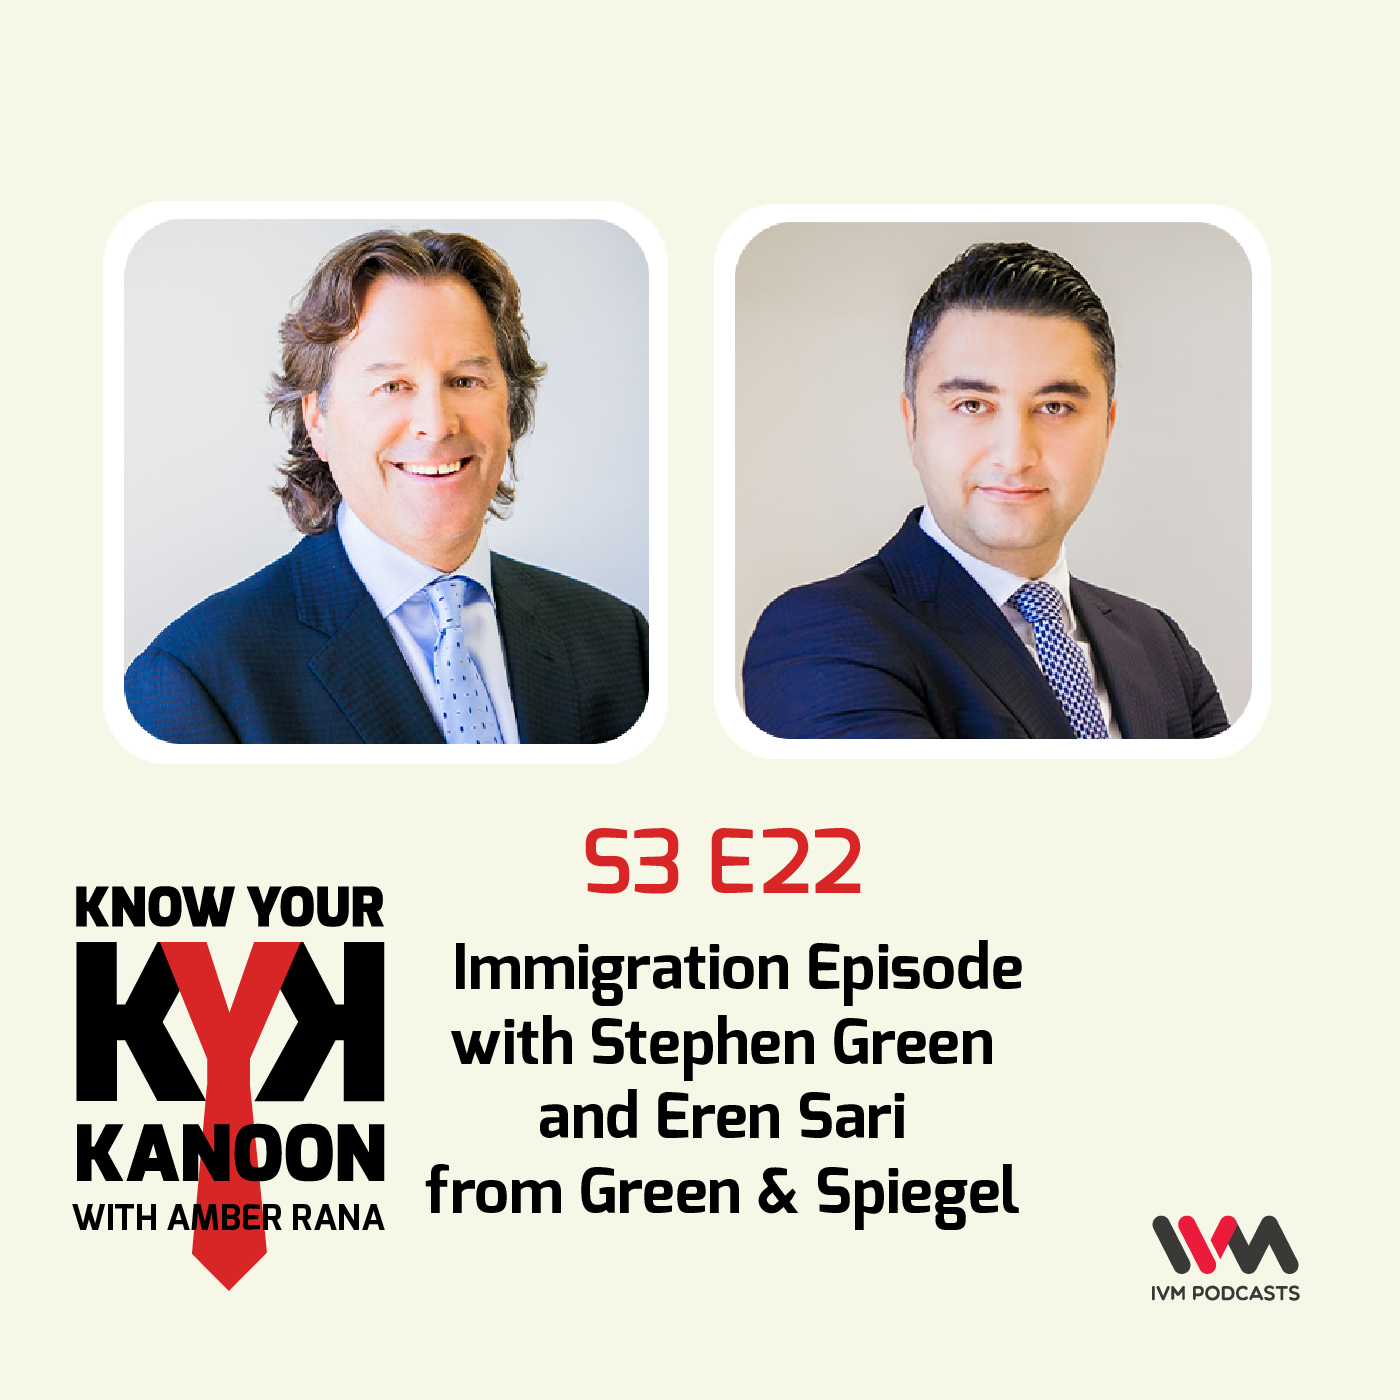 S03 E22: Immigration Episode with Stephen Green and Eren Sari from Green & Spiegel